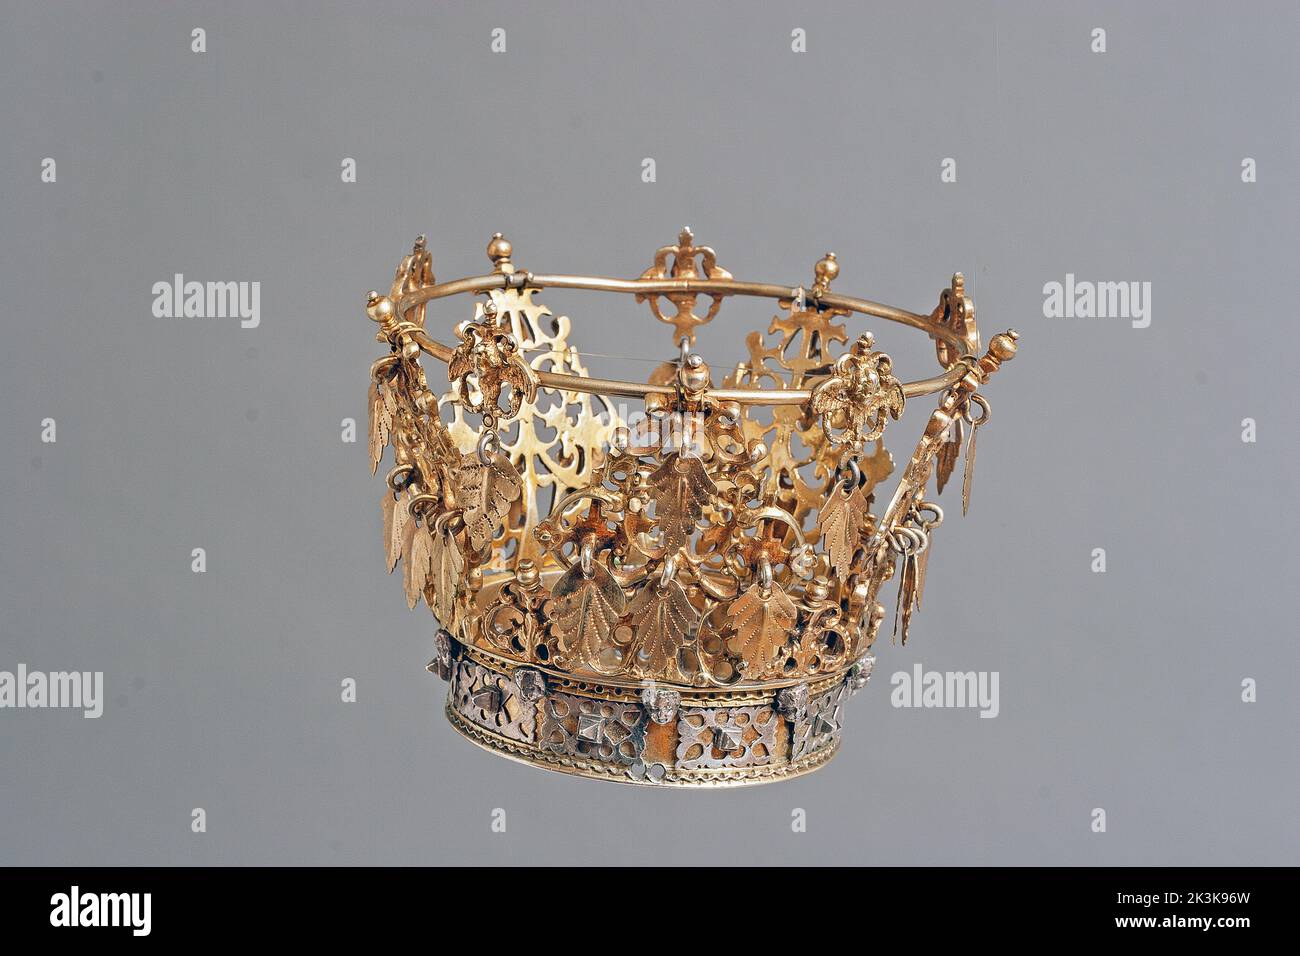 Bridal crown from sormland, sweden Stock Photo